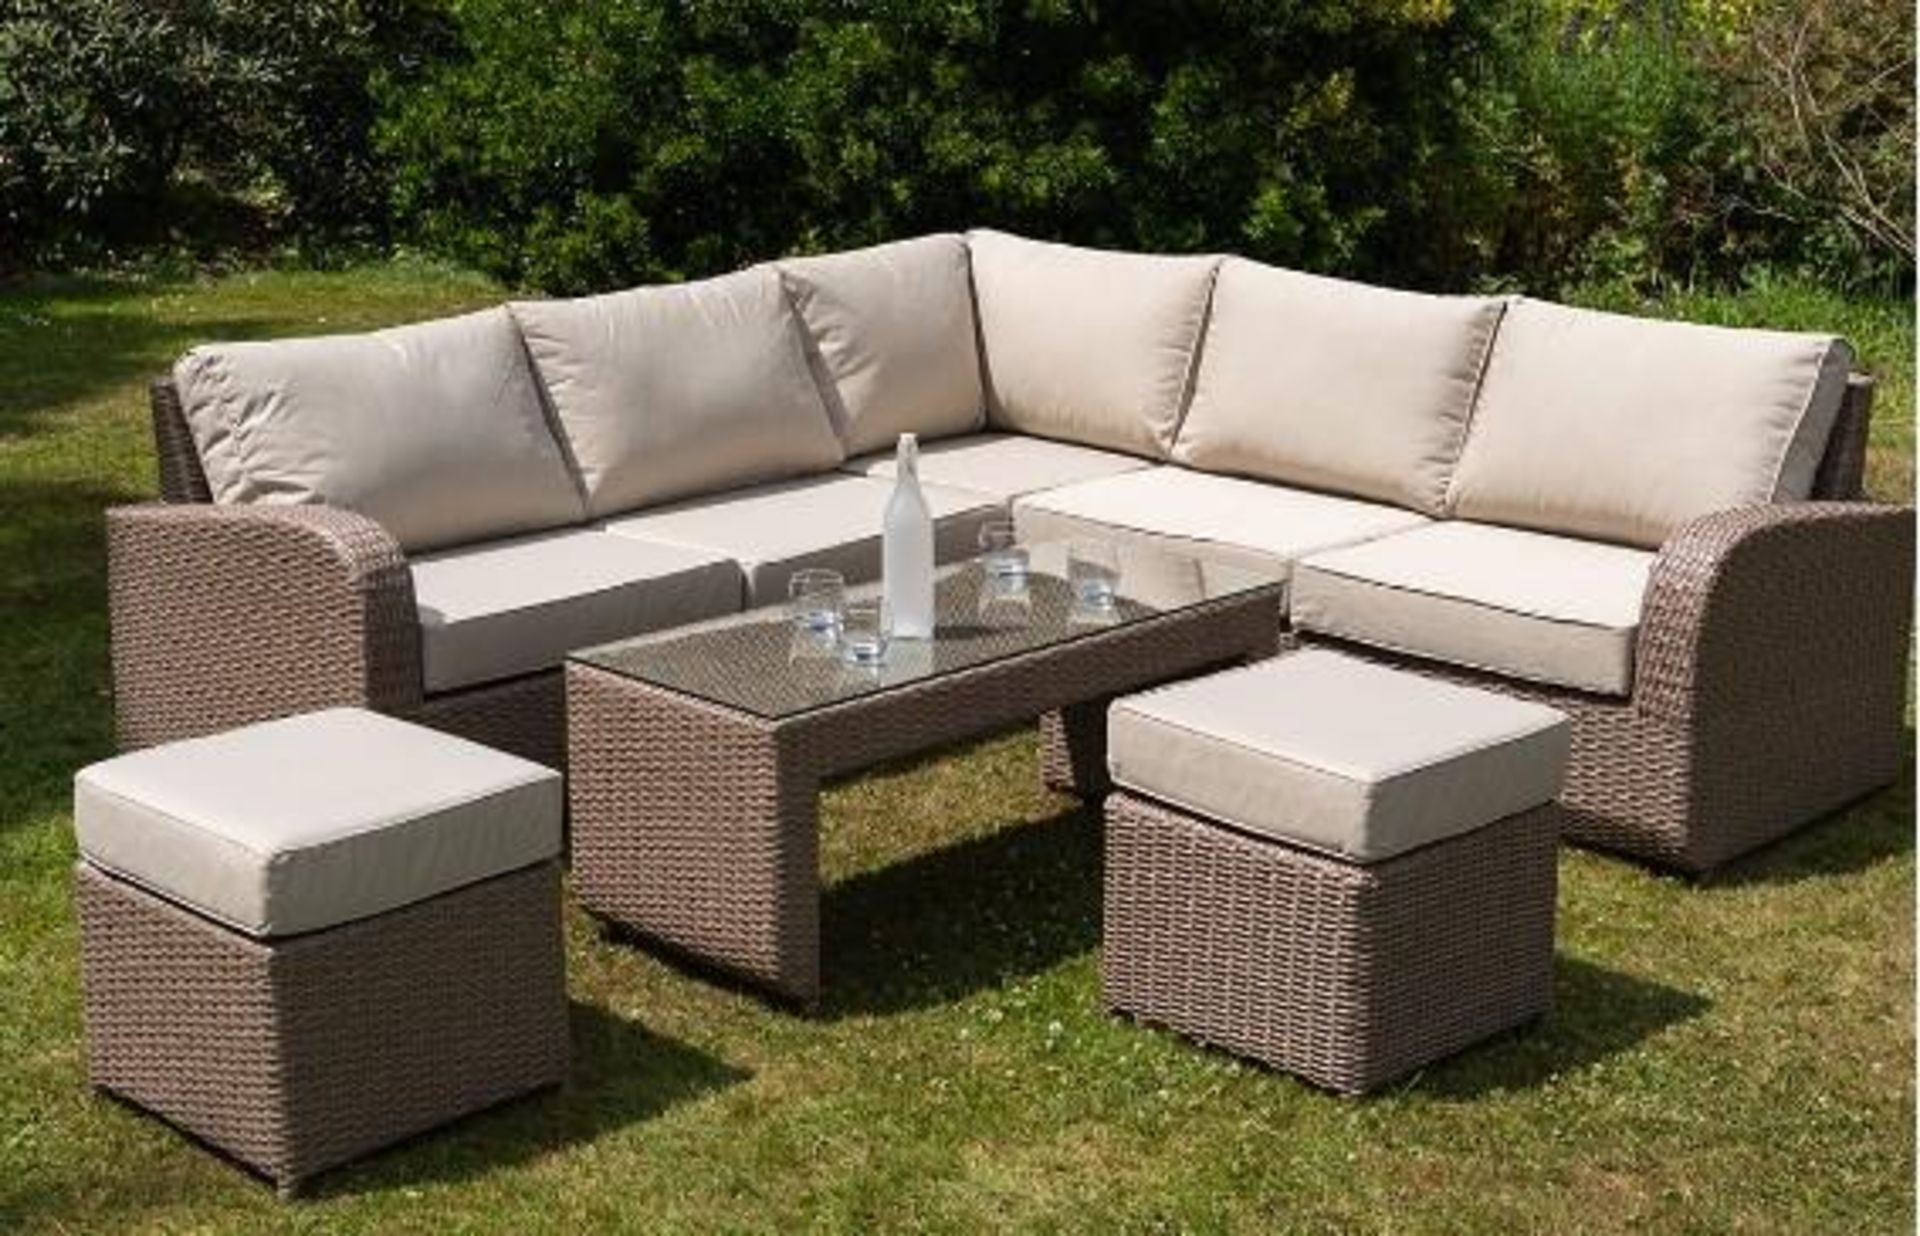 *BRAND NEW* 8 Seater Corner Group With Coffee Table in Natural. RRP: £1,599